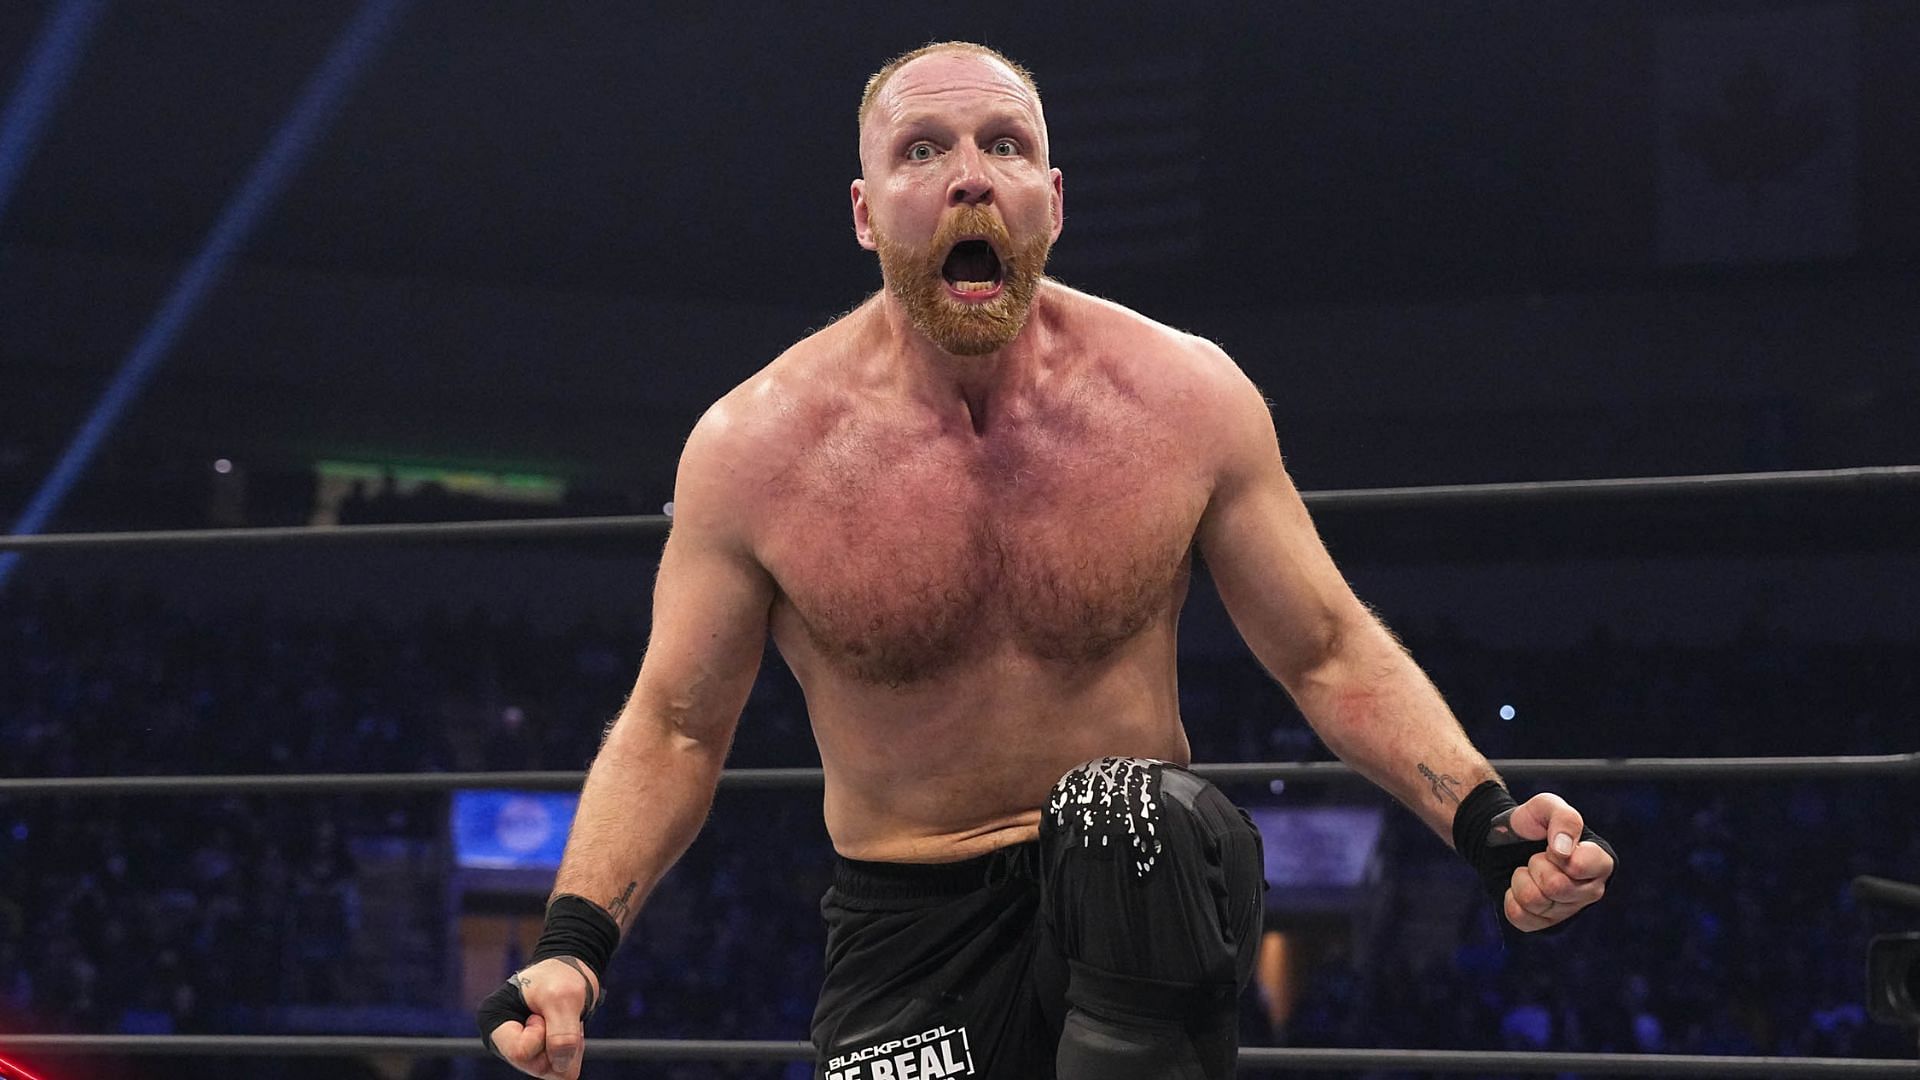 Jon Moxley is a former AEW World Champion and a member of the Blackpool Combat Club [Photo courtesy of AEW